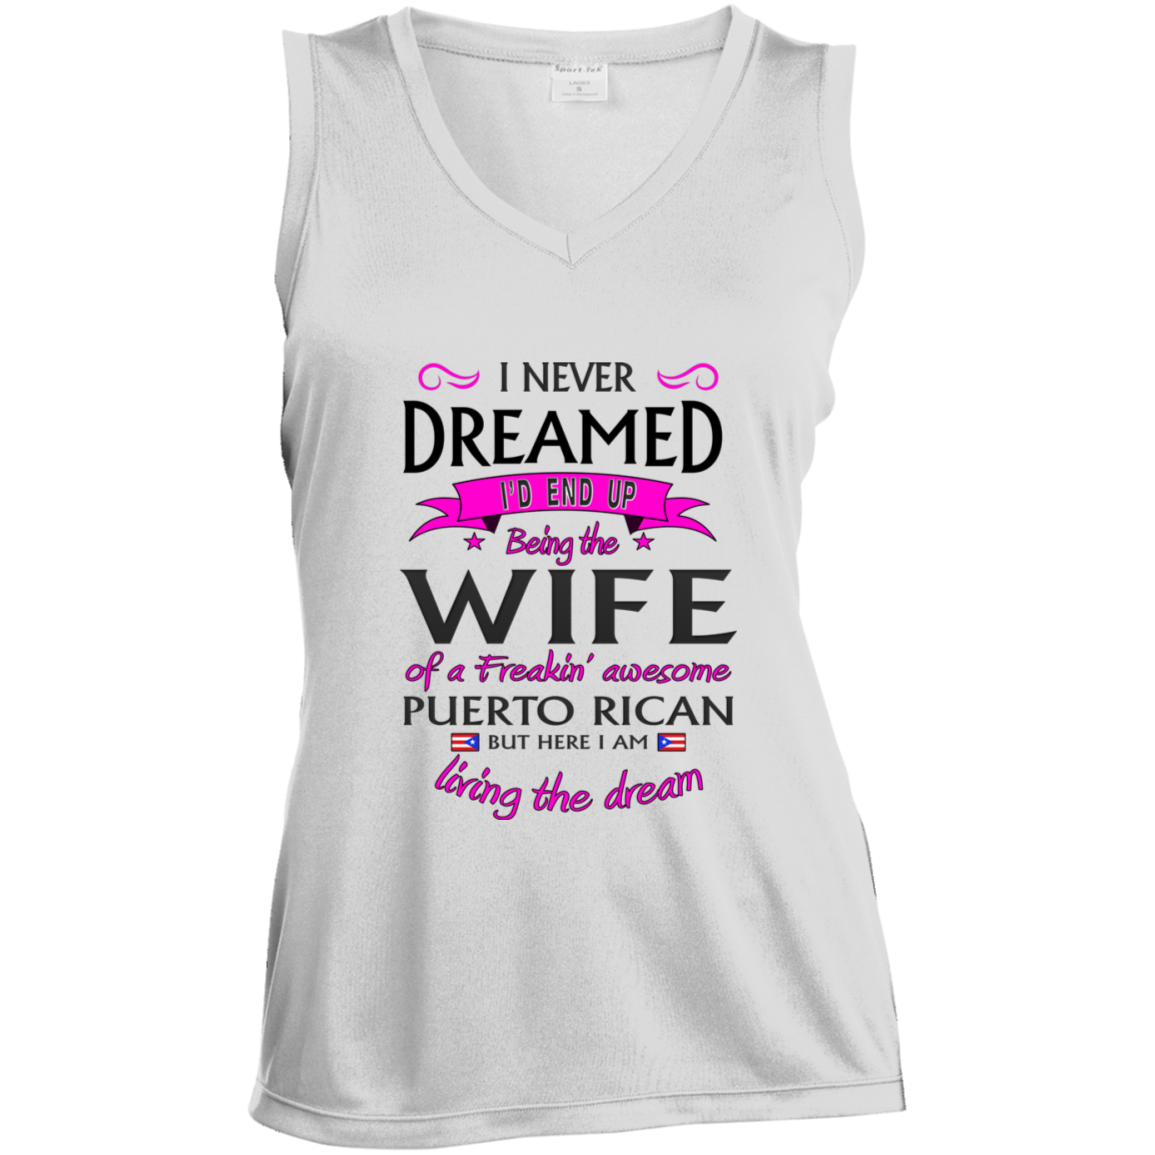 Wife of Awesome PR Sleeveless Moisture Absorbing V-Neck - Puerto Rican Pride